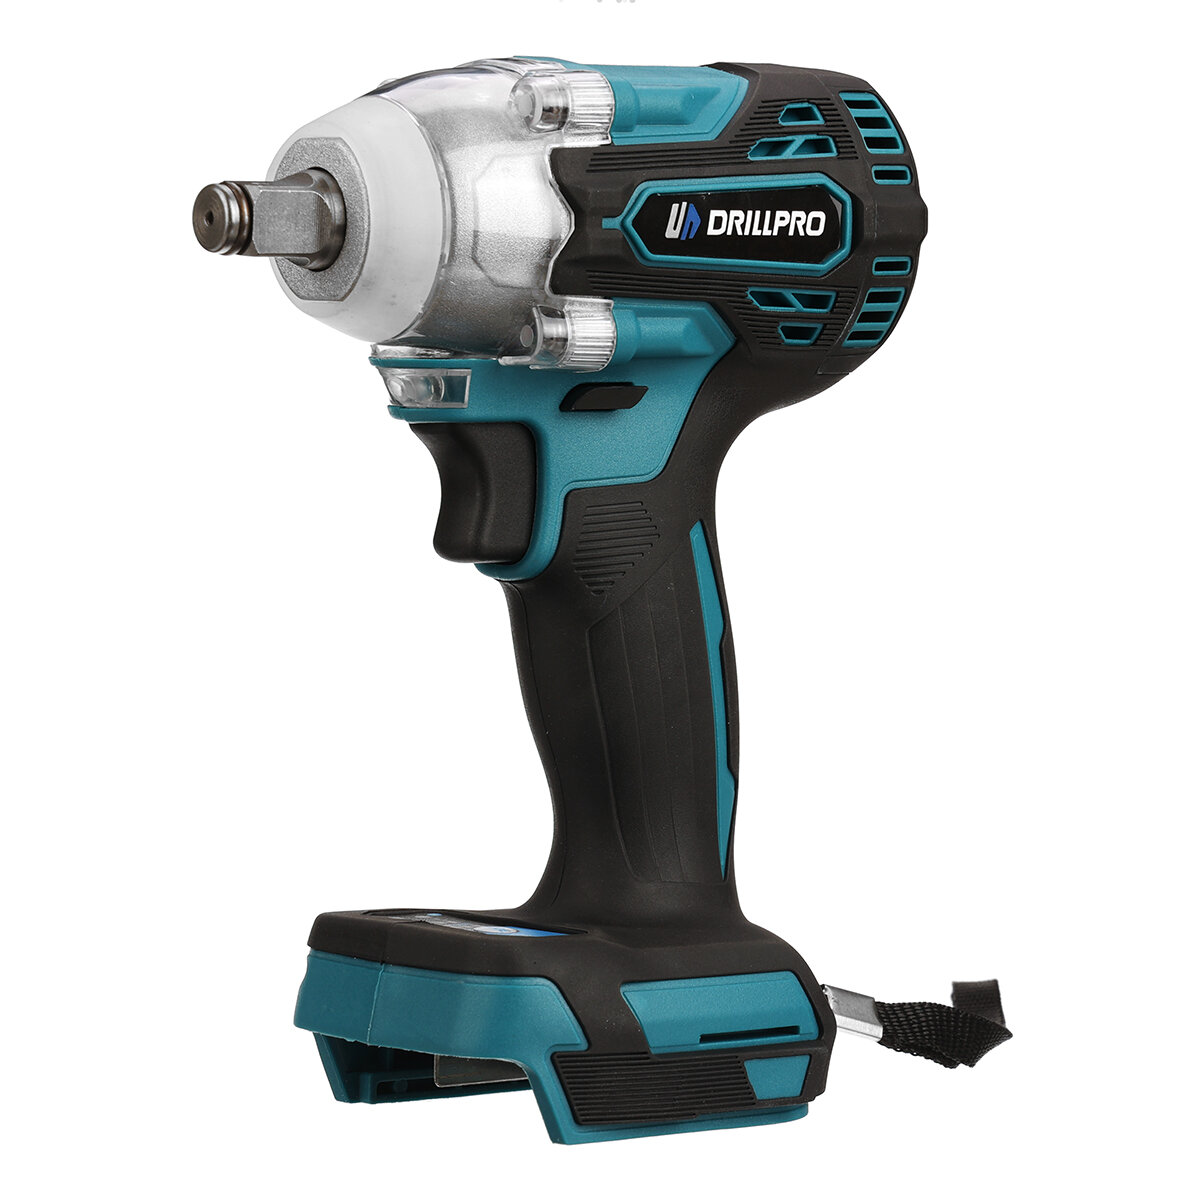 best price,drillpro,18v,300nm,electric,brushless,impact,wrench,for,18v,makita,discount